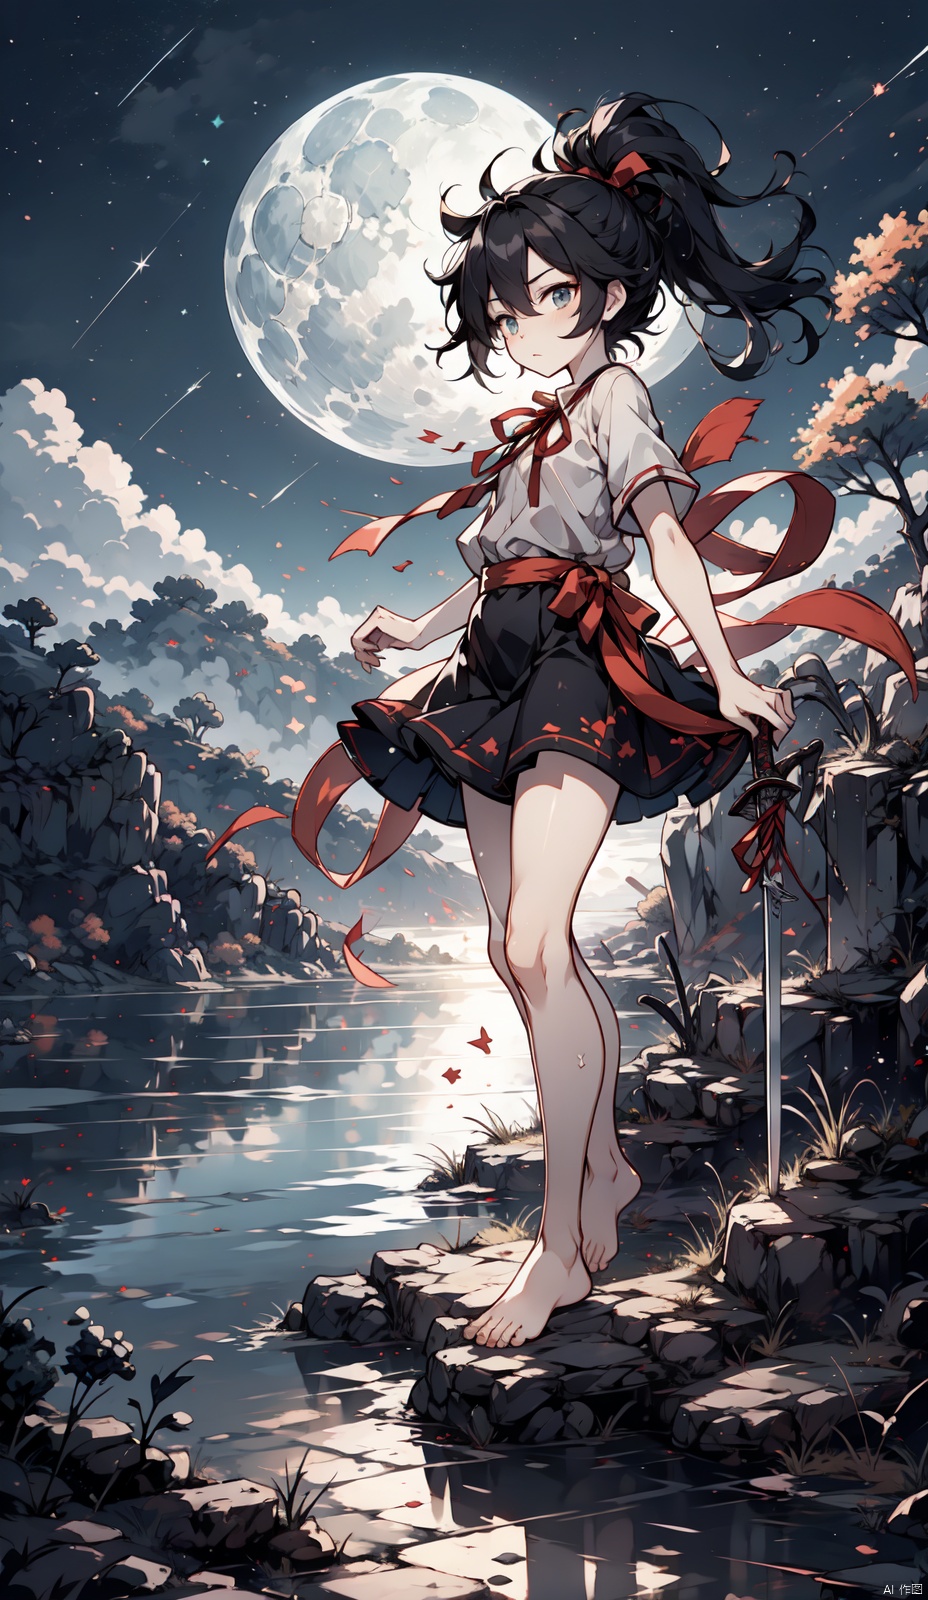  1 girl, knight, (HDR: 1.4), high contrast, low saturation, white short-sleeved shirt, black mini skirt, short hair, single ponytail, hair tied with a red ribbon, color block background, whole body, soft clothing texture, eyes looking at viewer, horizontal, lake, moonlight, bare feet, elegance, shooting star, starlight, red ribbon fluttering in the wind, sword, foreground, shota